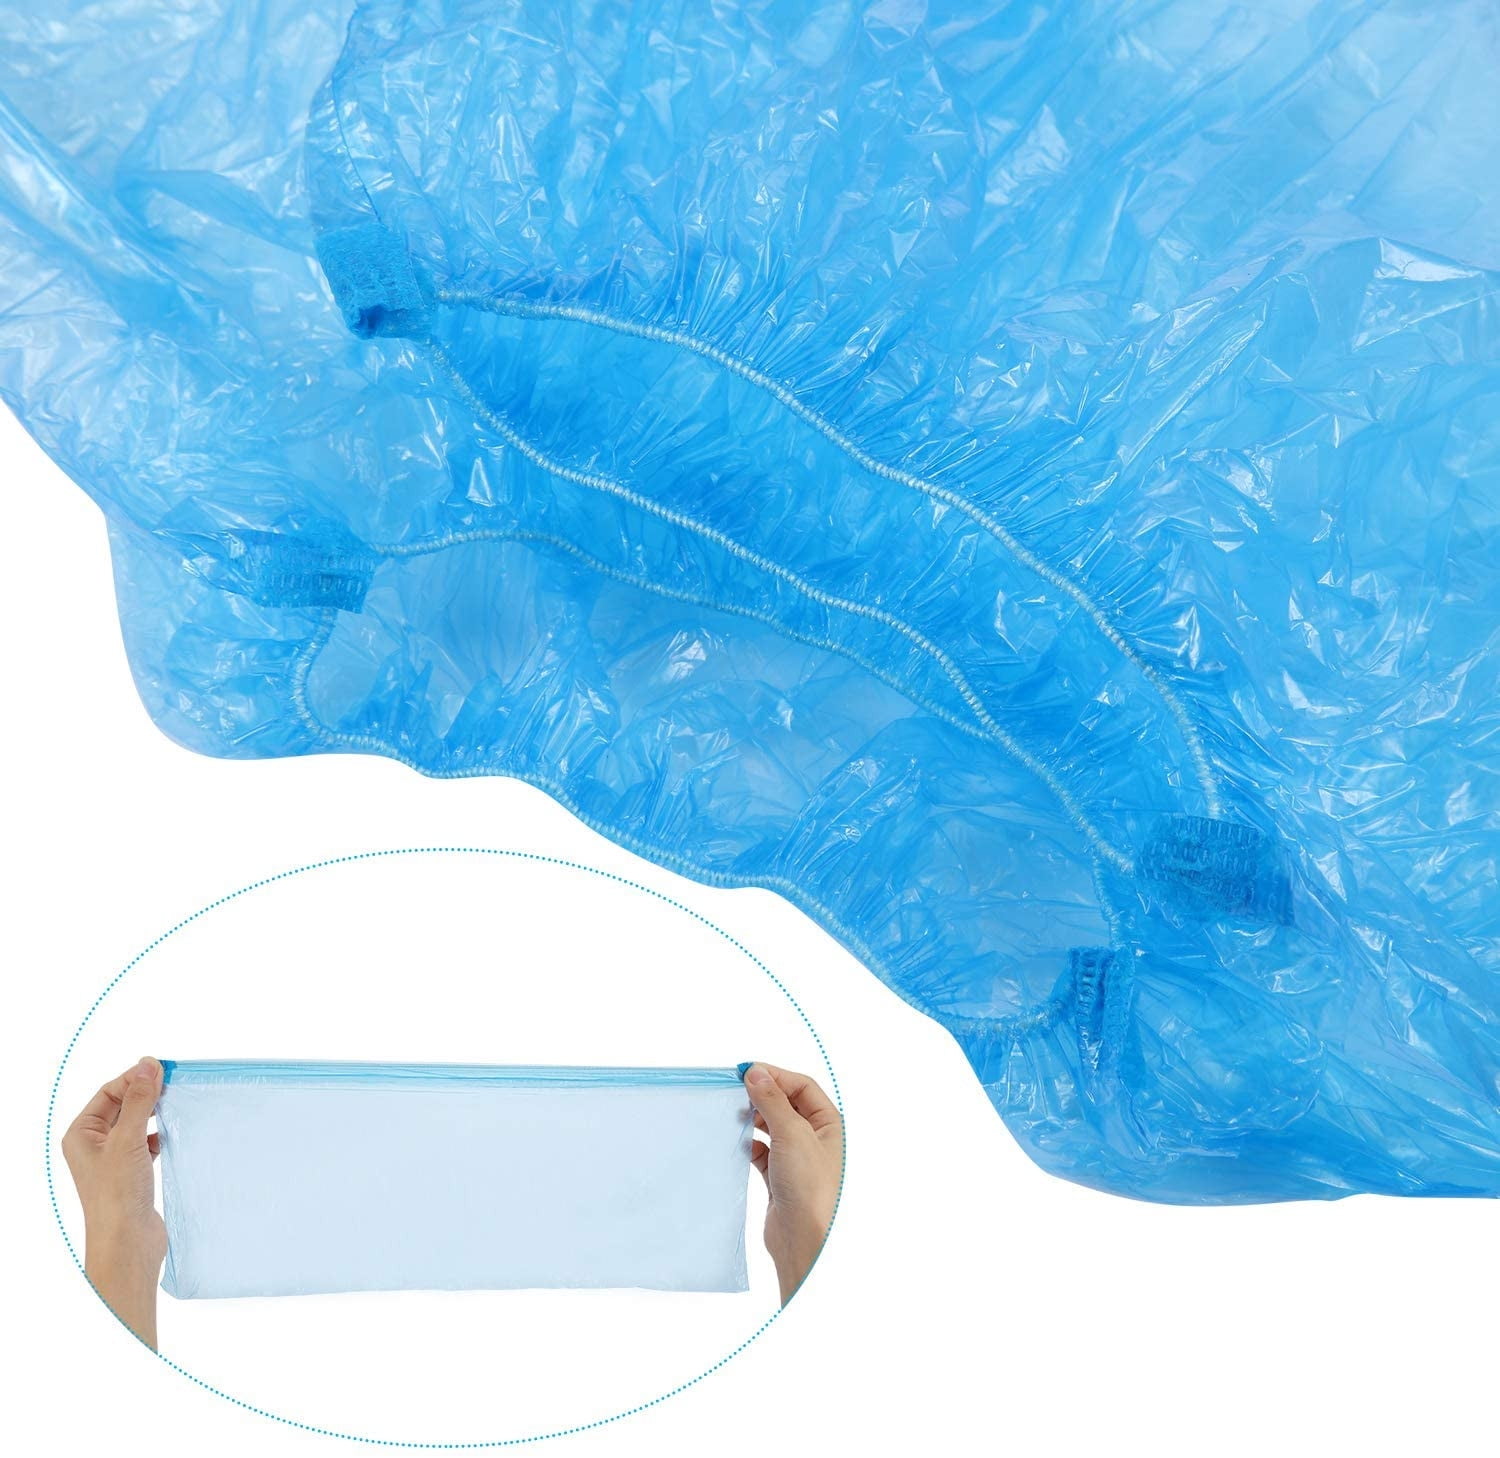 Details about   200x Disposable Long Shoe Covers Hygienic Boot Cover for Workplace Indoor Carpet 